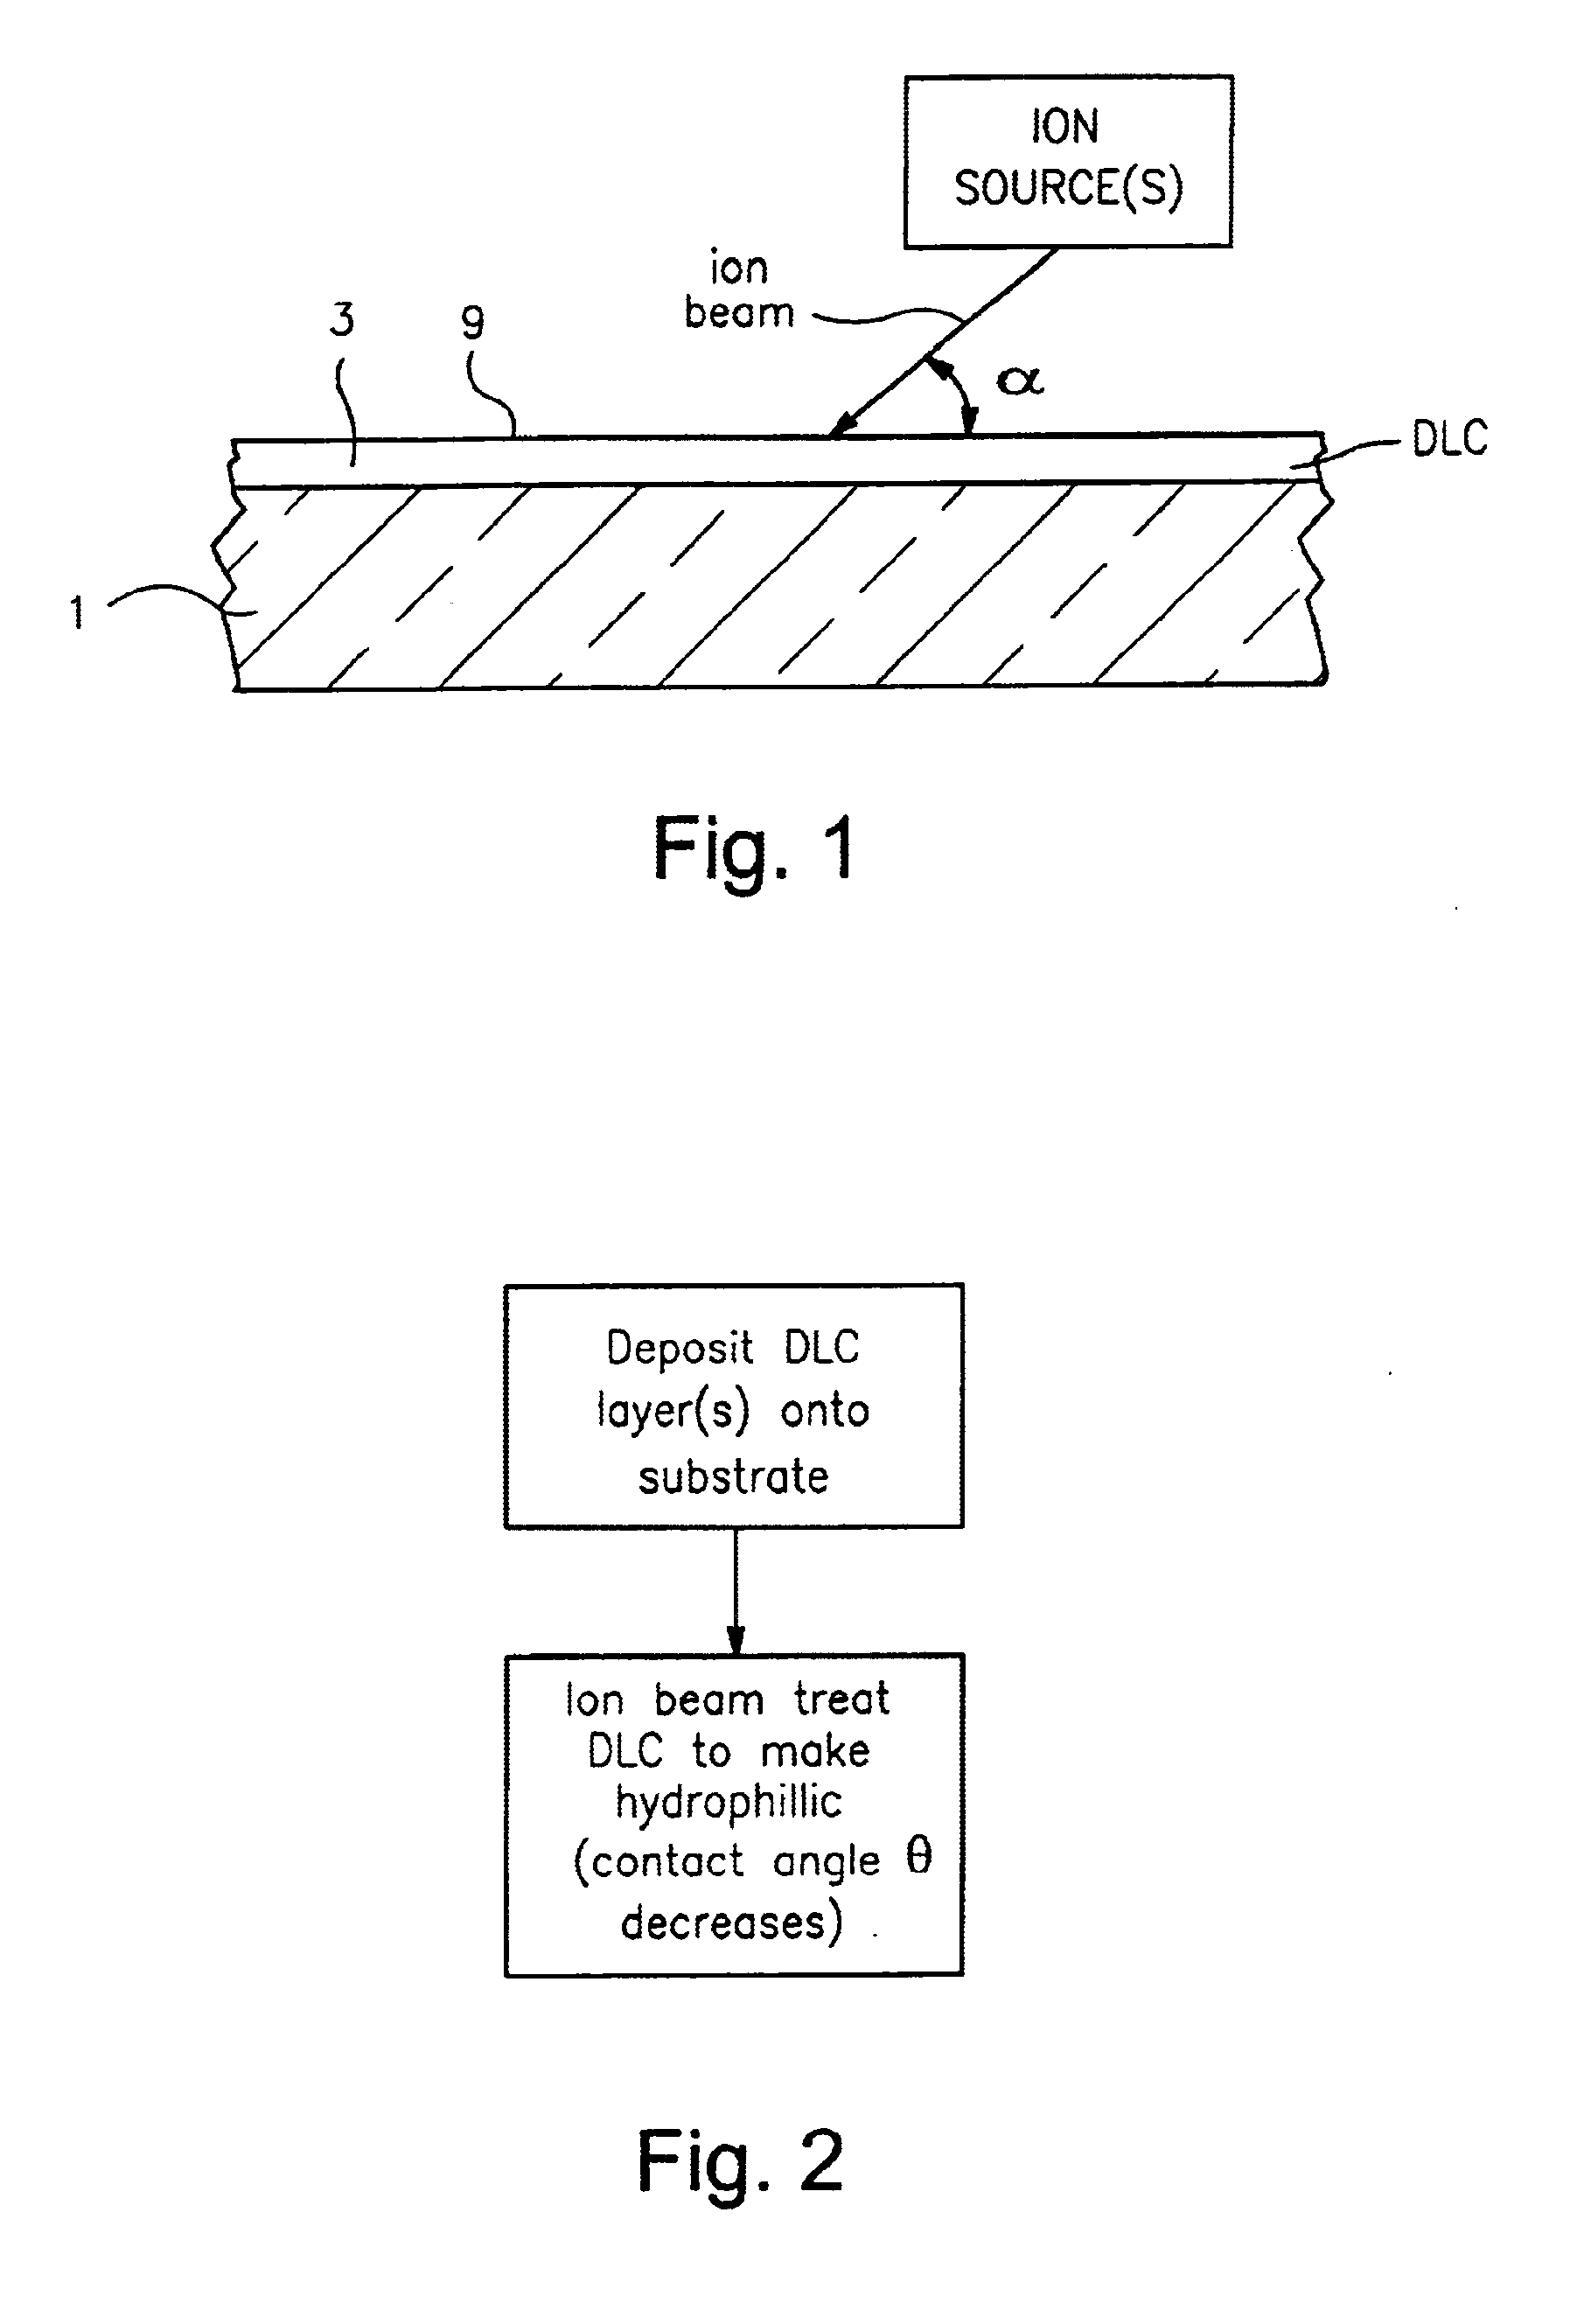 Method of ion beam treatment of DLC in order to reduce contact angle